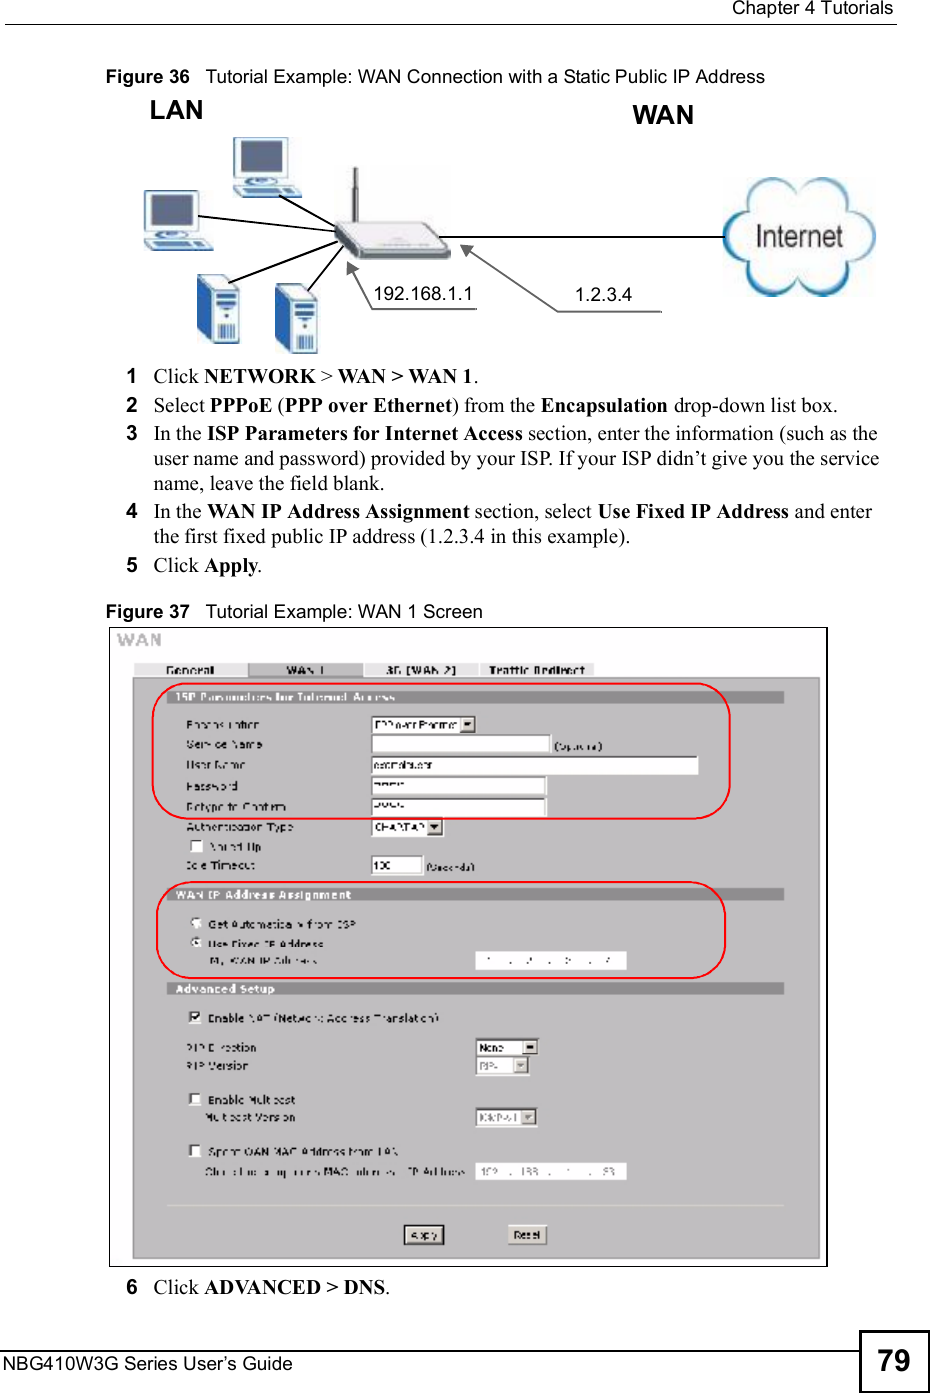  Chapter 4TutorialsNBG410W3G Series User s Guide 79Figure 36   Tutorial Example: WAN Connection with a Static Public IP Address 1Click NETWORK &gt; WAN &gt; WAN 1. 2Select PPPoE (PPP over Ethernet) from the Encapsulation drop-down list box.3In the ISP Parameters for Internet Access section, enter the information (such as the user name and password) provided by your ISP. If your ISP didn!t give you the service name, leave the field blank.4In the WAN IP Address Assignment section, select Use Fixed IP Address and enter the first fixed public IP address (1.2.3.4 in this example).5Click Apply.Figure 37   Tutorial Example: WAN 1 Screen 6Click ADVANCED &gt; DNS.192.168.1.1 1.2.3.4WANLAN